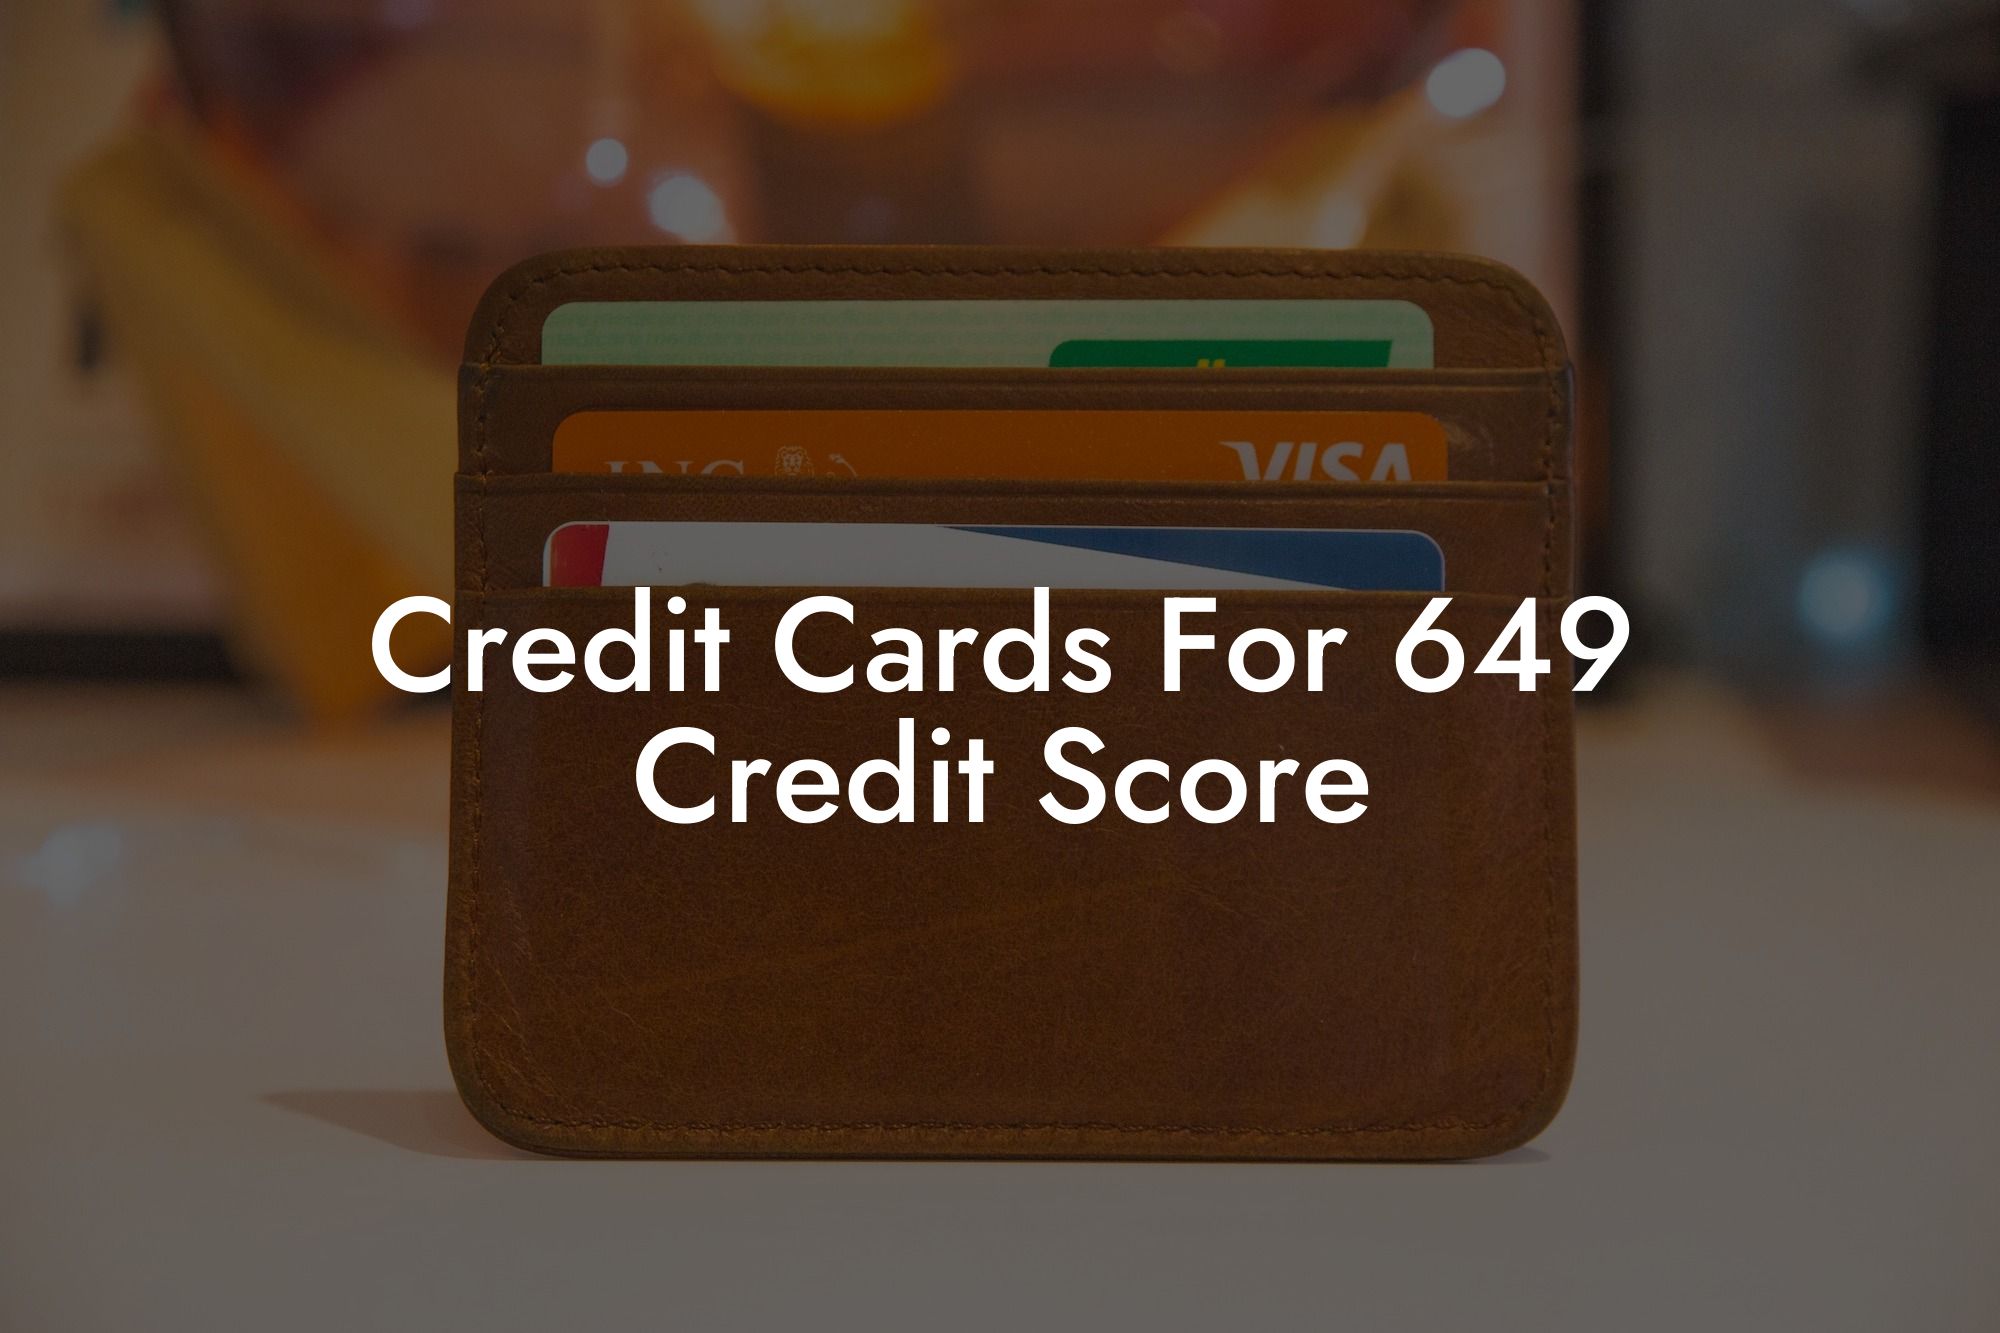 Credit Cards For 649 Credit Score